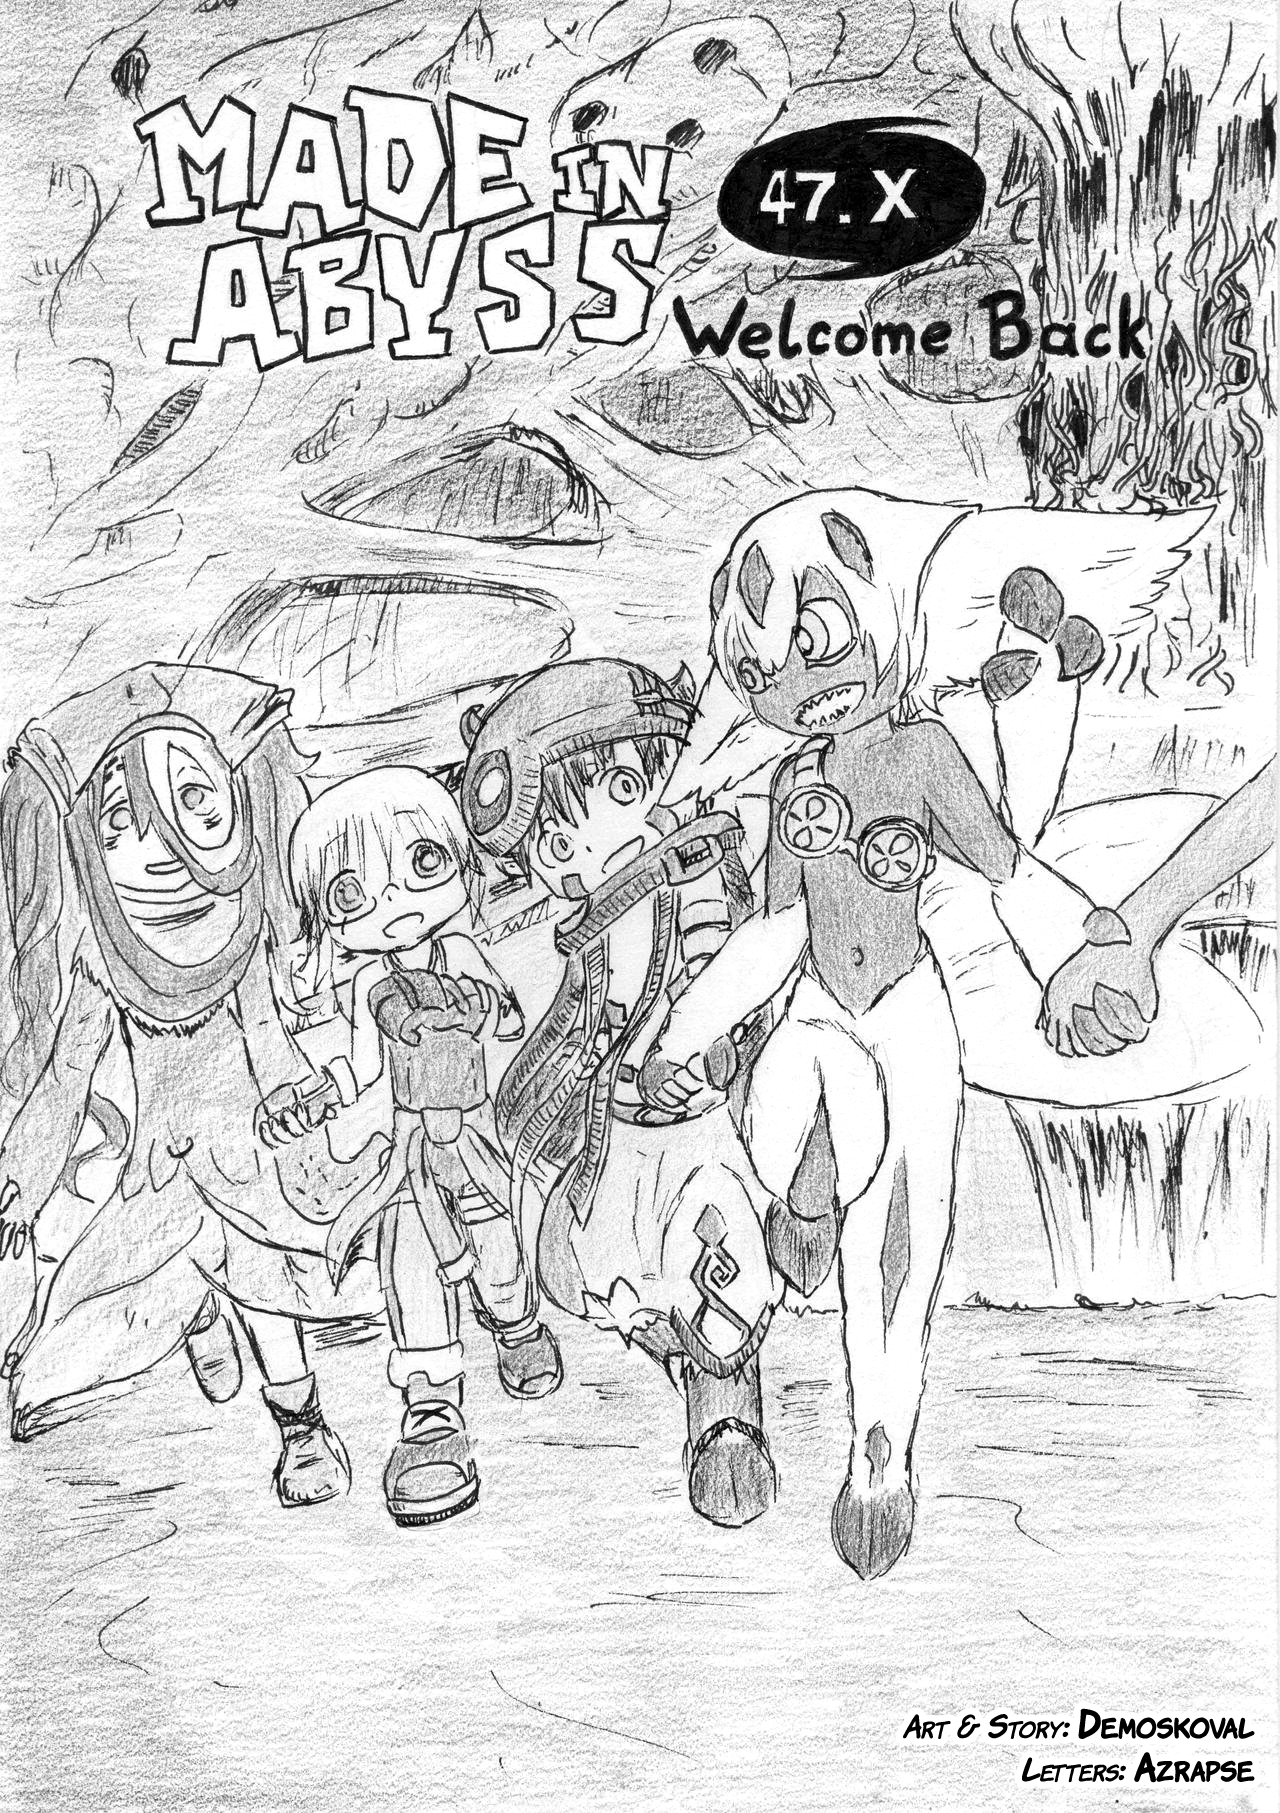 Made in Abyss 47.X: Welcome Back Vol. 1 Ch. 1 Part I